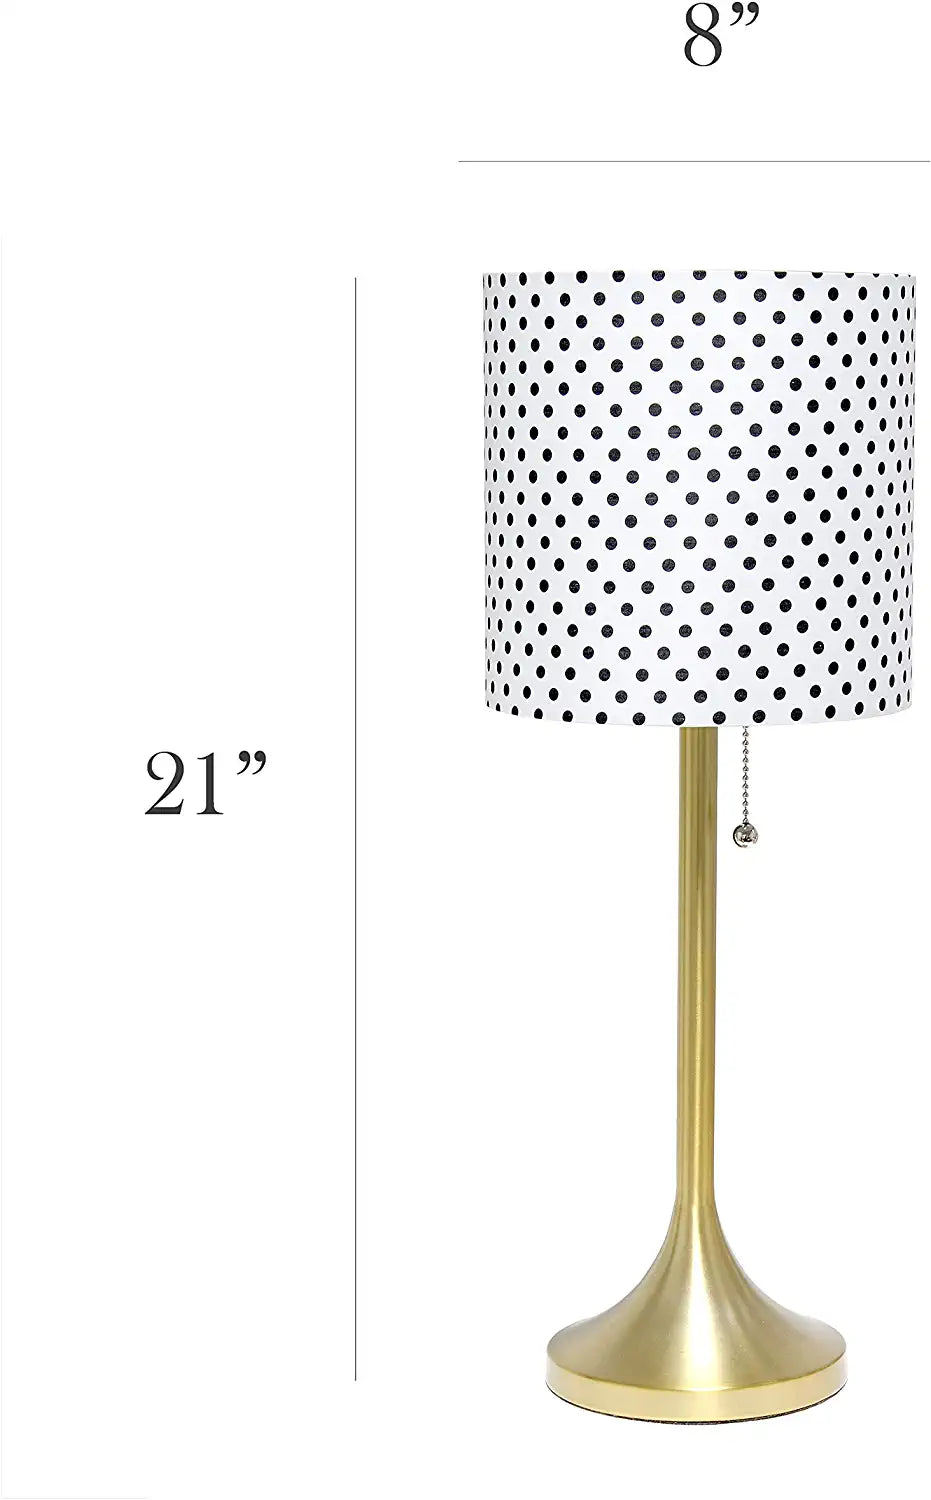 Simple Designs LT1076-GDD Tapered Fabric Drum Shade Table Lamp, Gold/Polka Dot